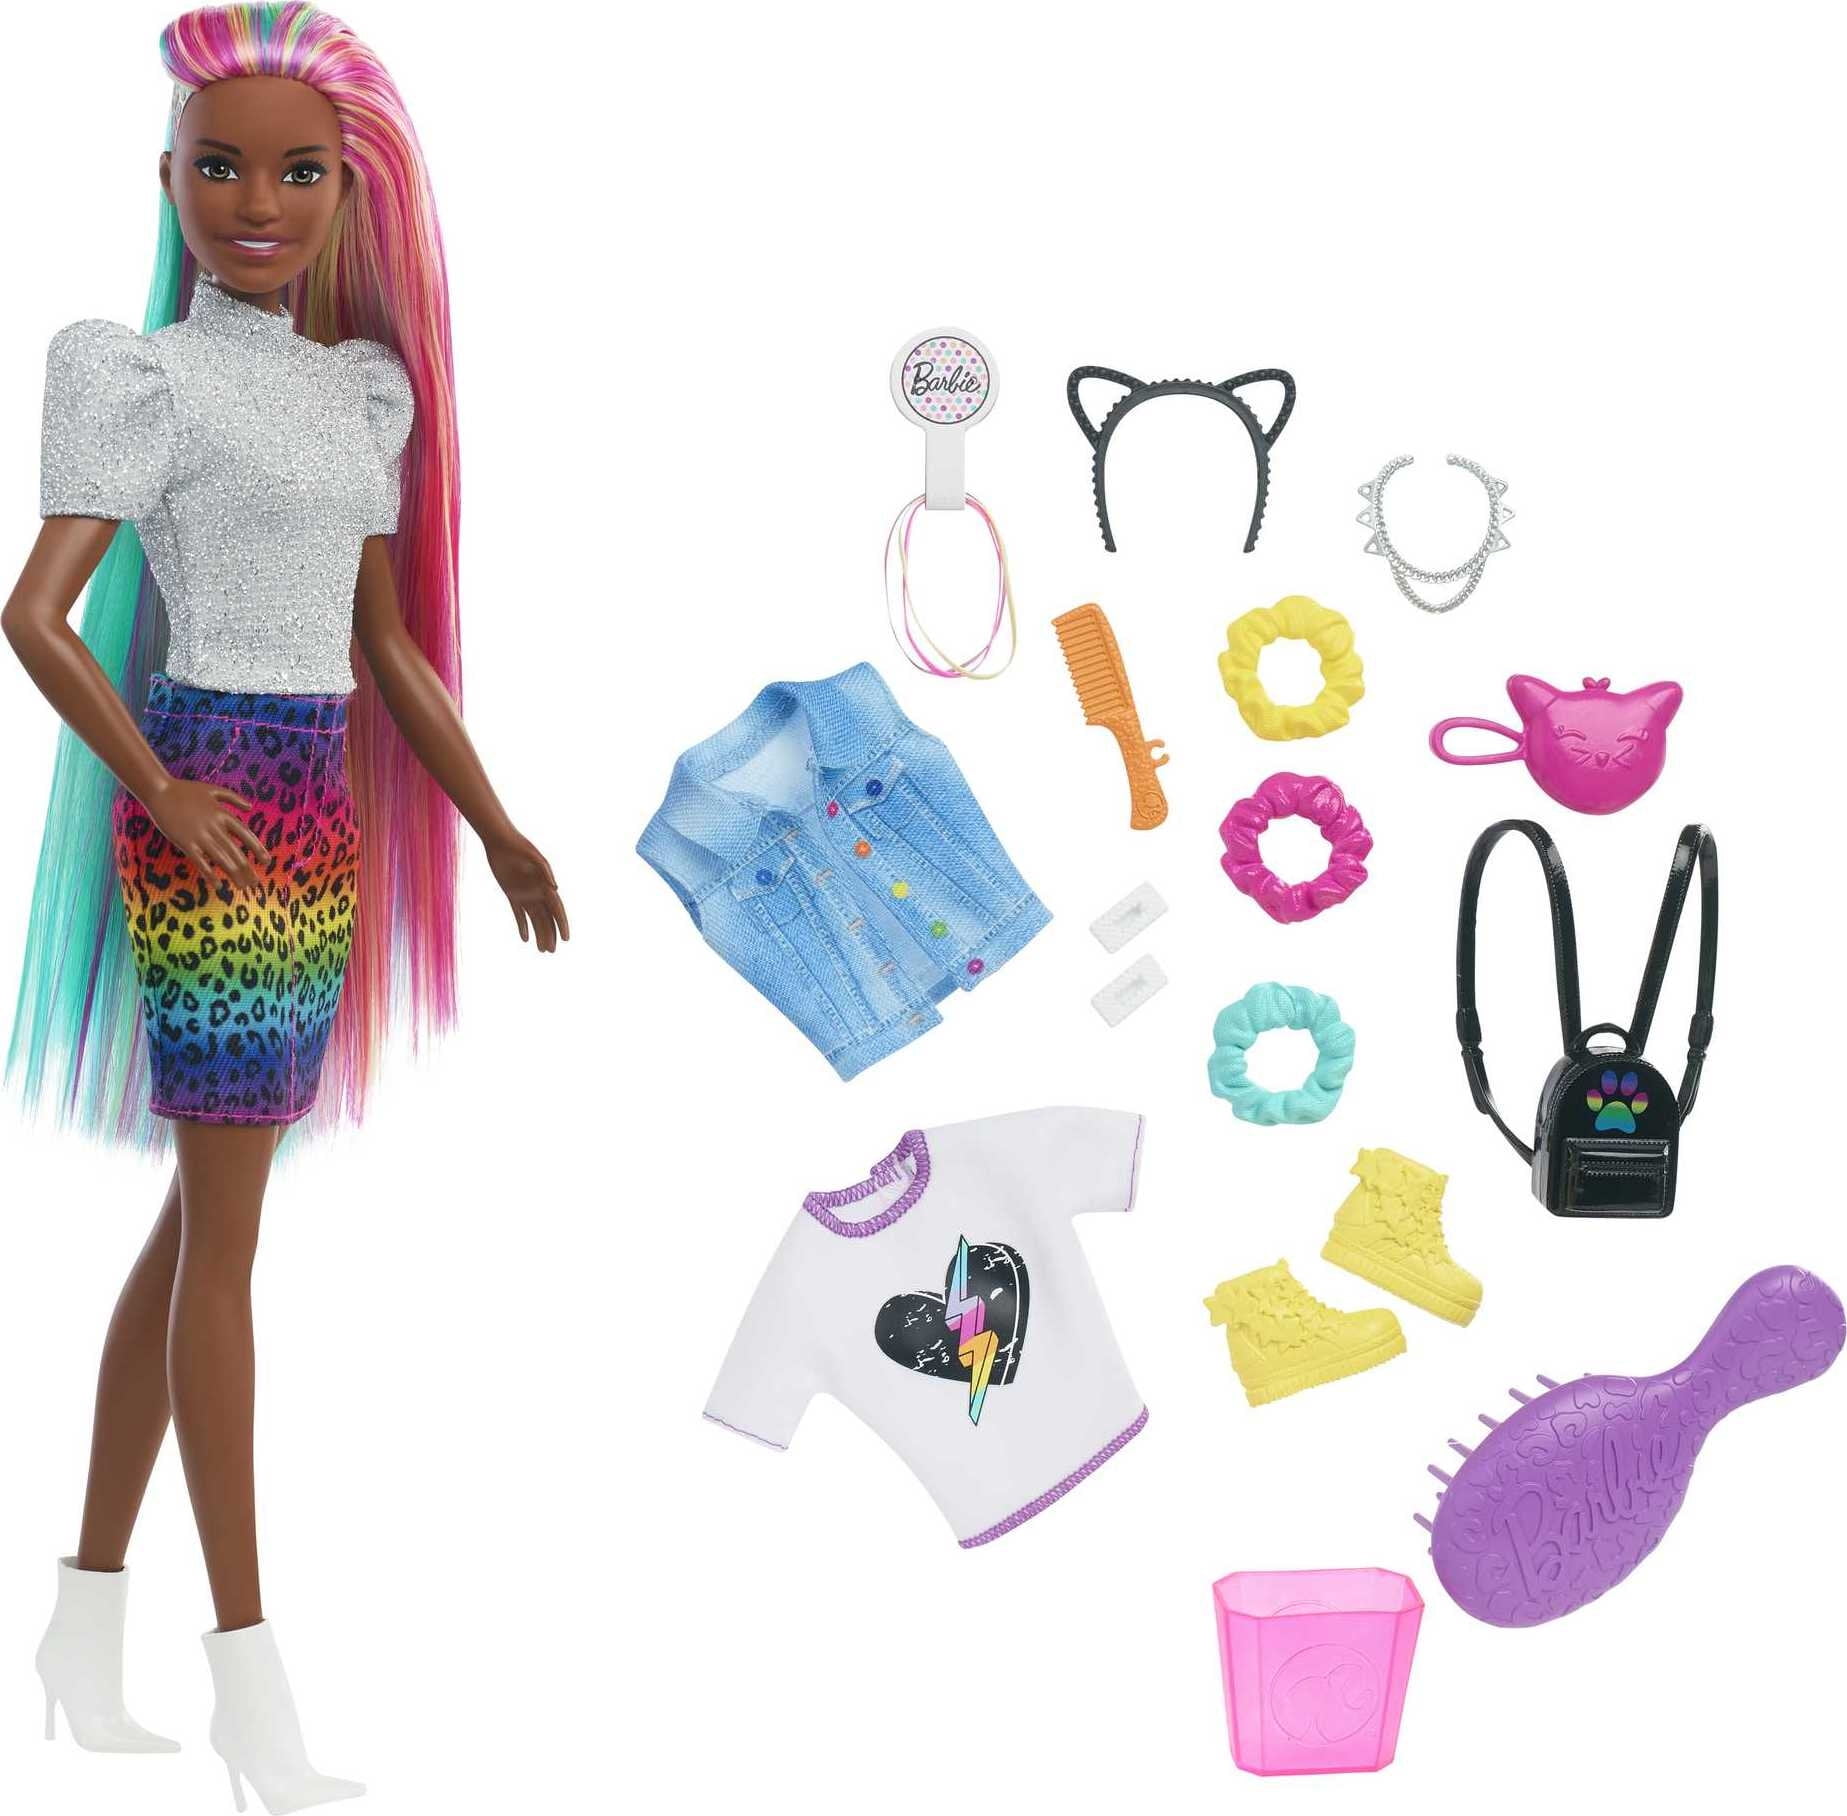 Barbie Fashions Complete Looks 4 of Doll Clothes Inspired by Popular Brand  Roxy, Complete Look with Outfit & Accessories Dolls, Gift for Kids 3 to 8